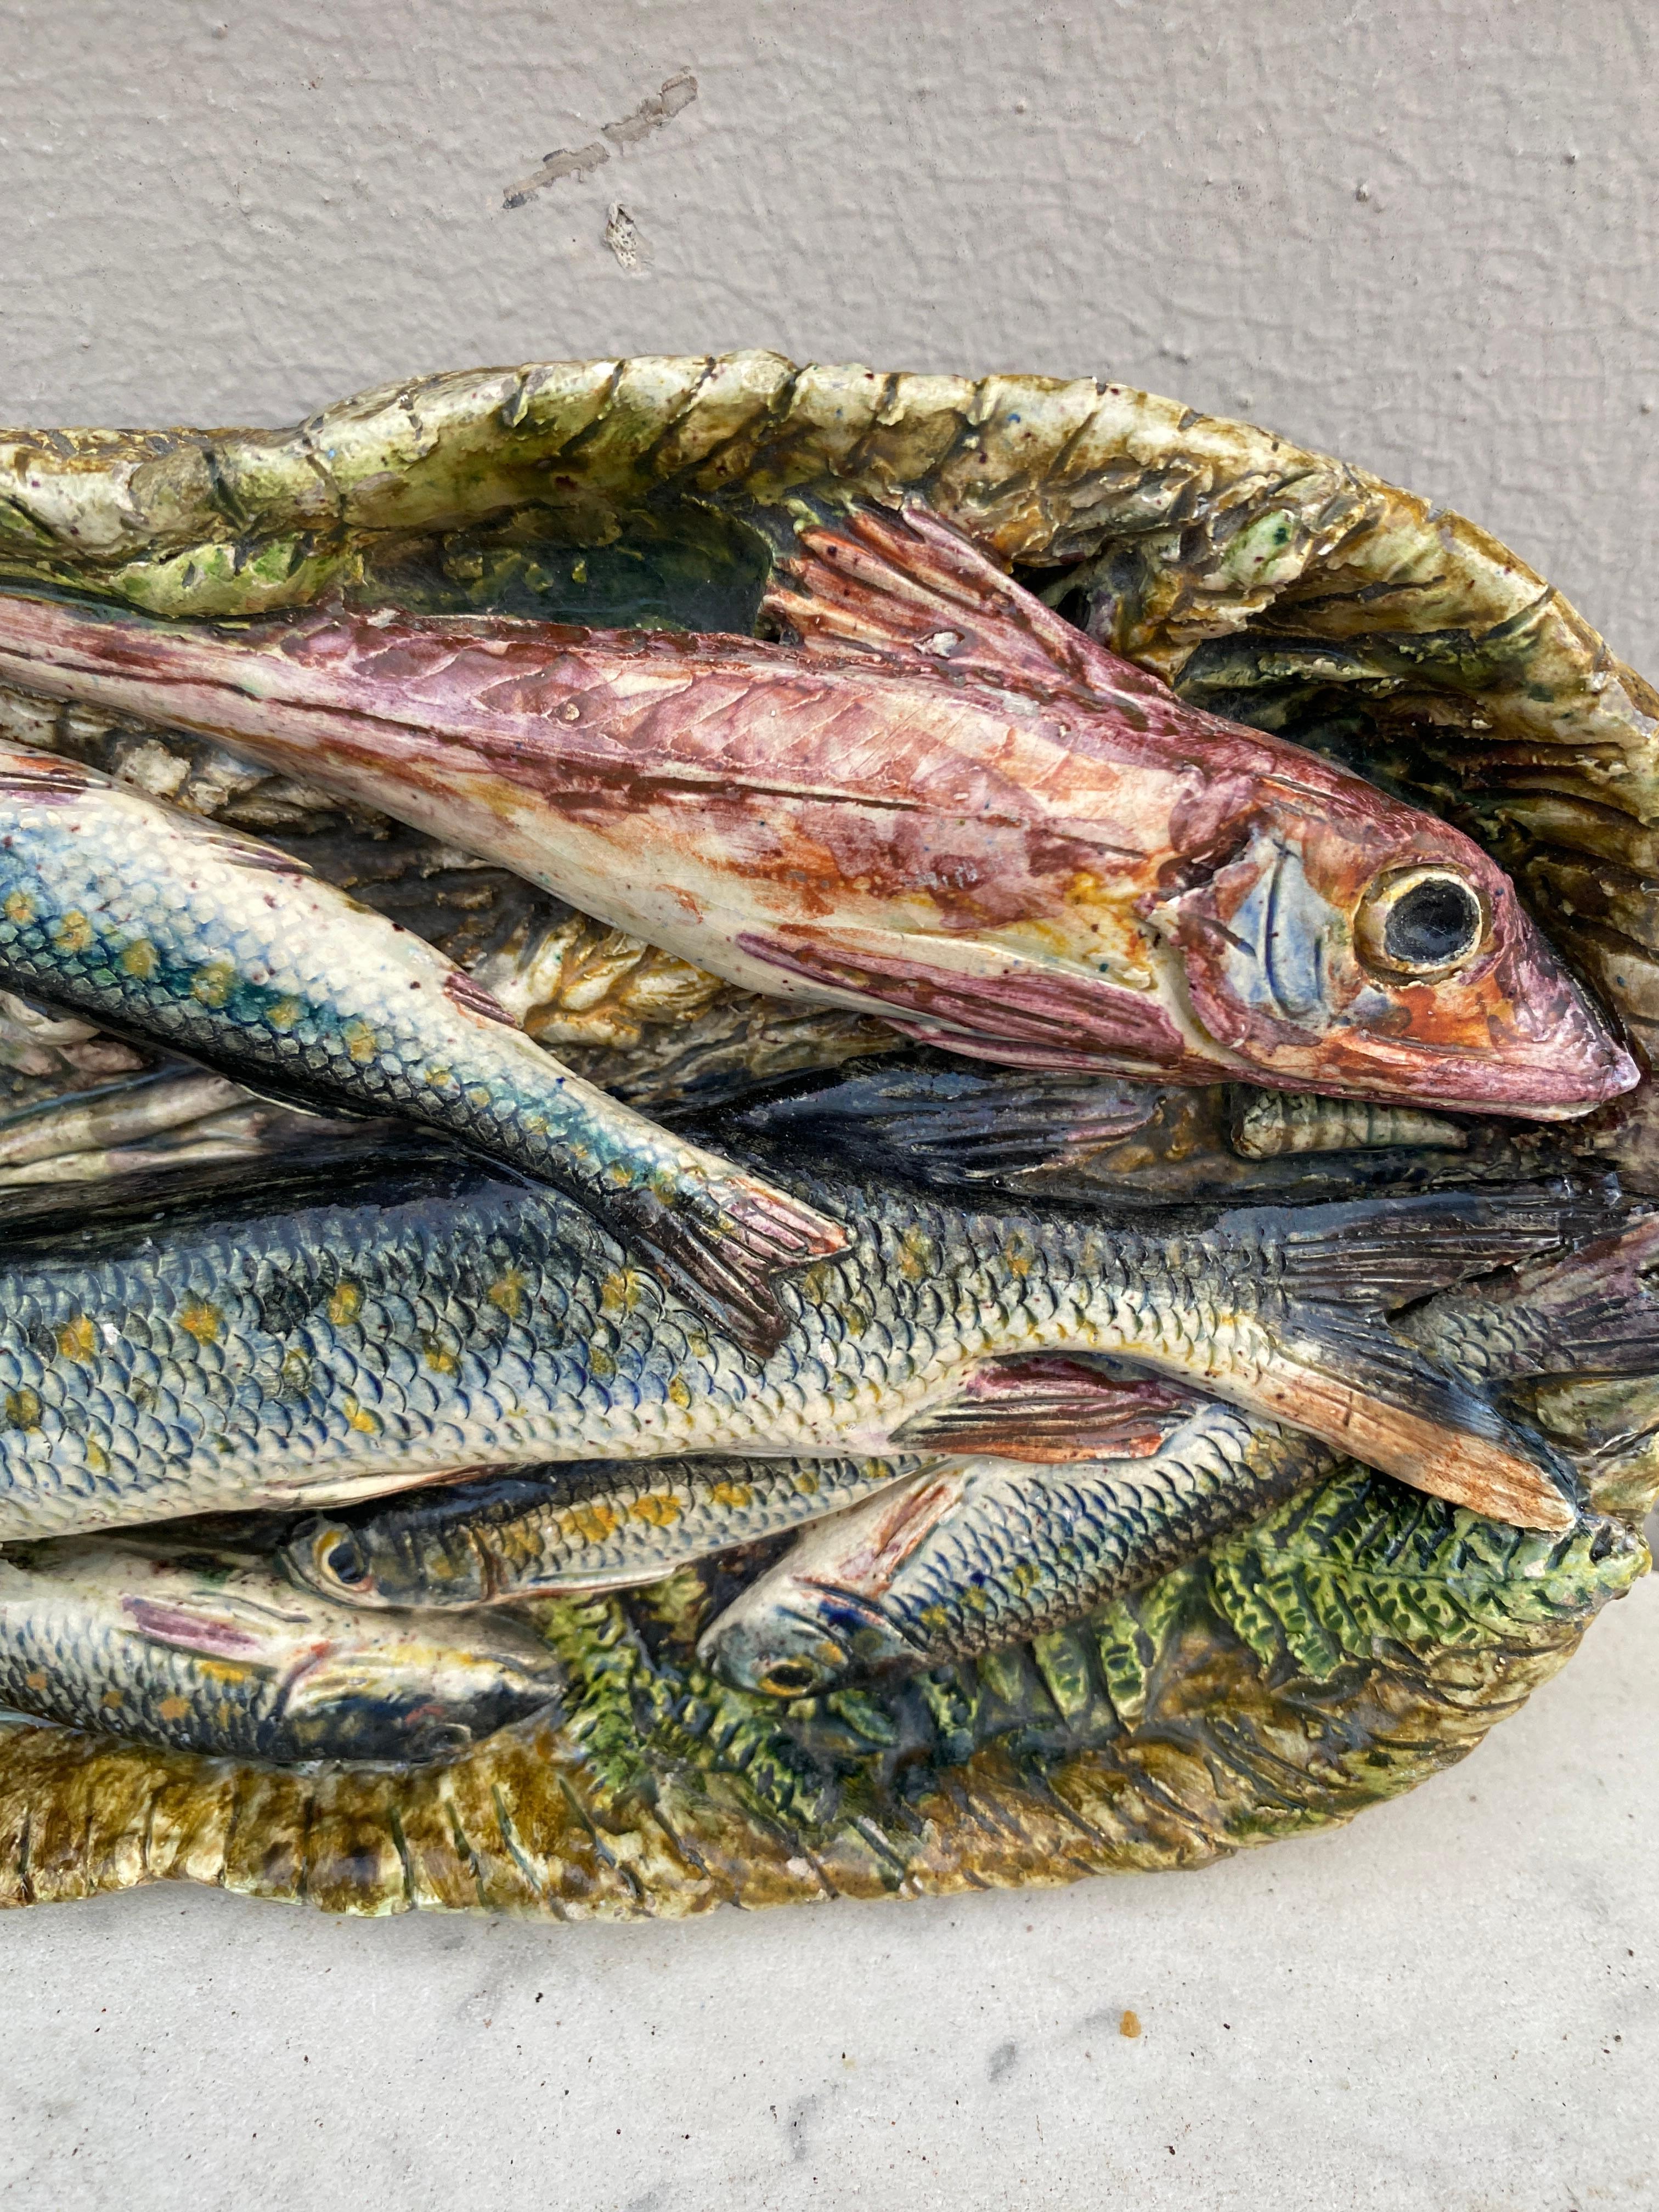 19th Century Rare Majolica Palissy Fish Basket Platter signed Leon Brard.
7 fishs, mussels ,ears of wheat ,and shell.